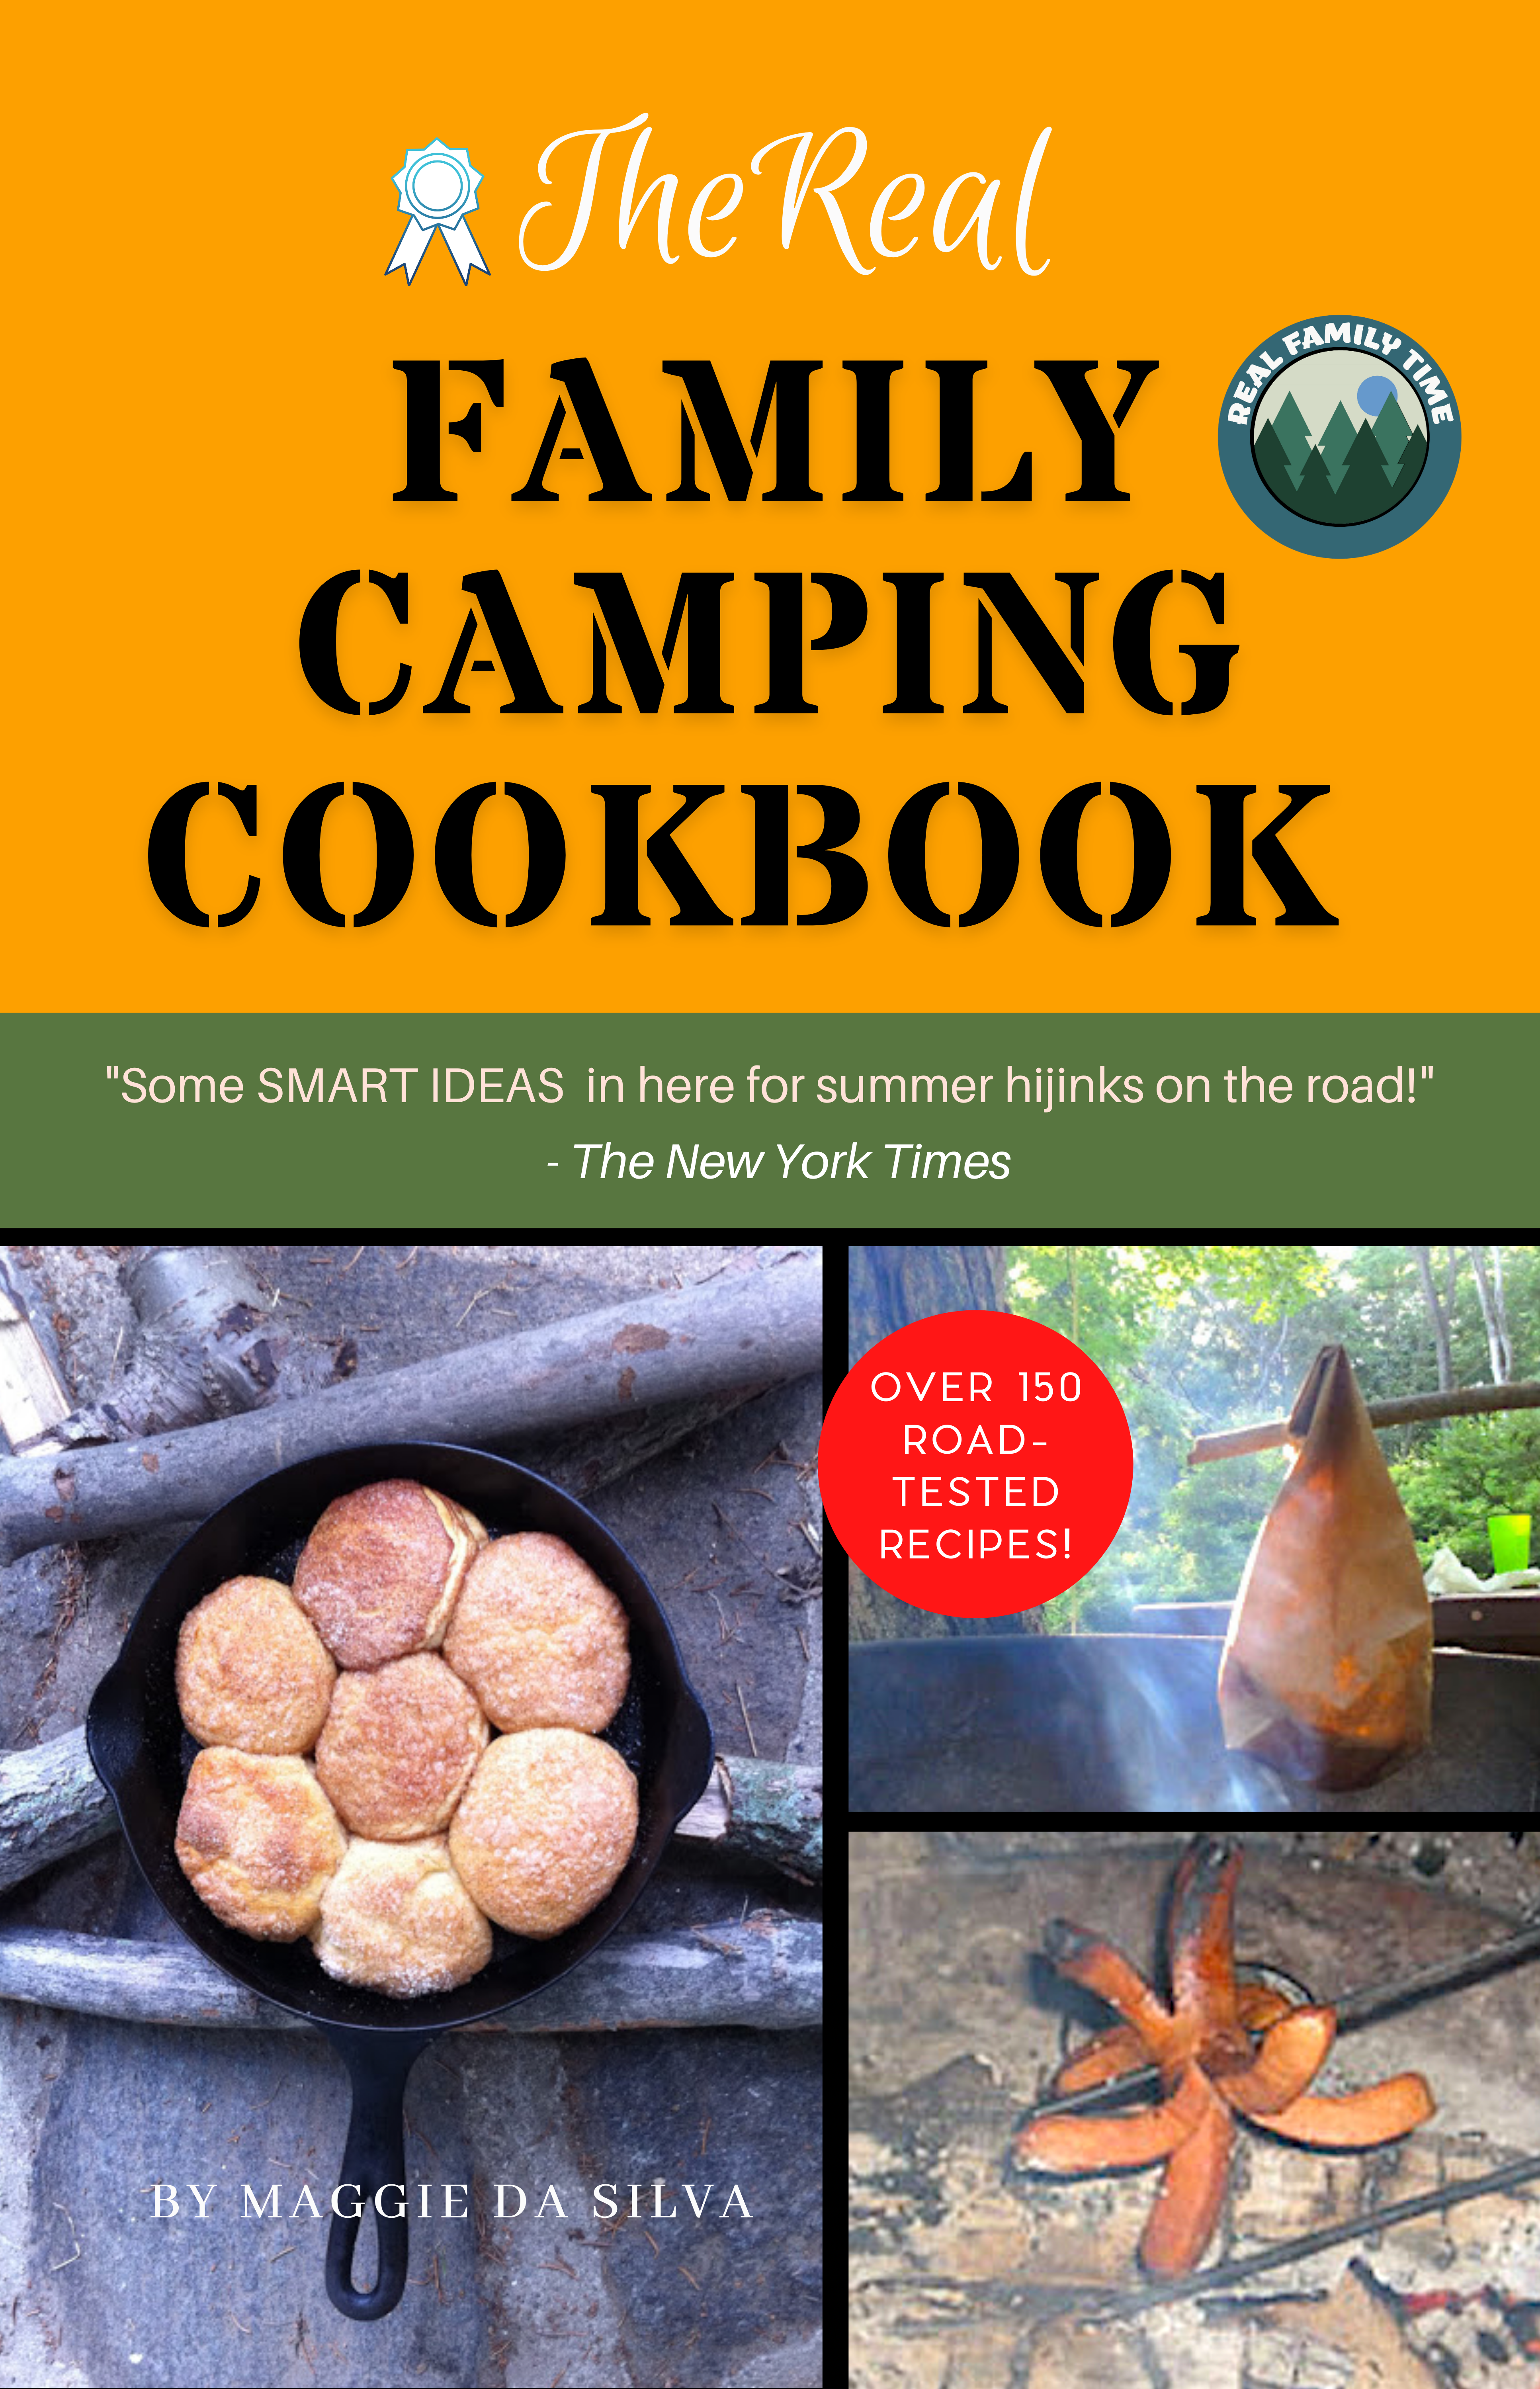 FREE: The Real Family Camping Cookbook by Maggie da Silva